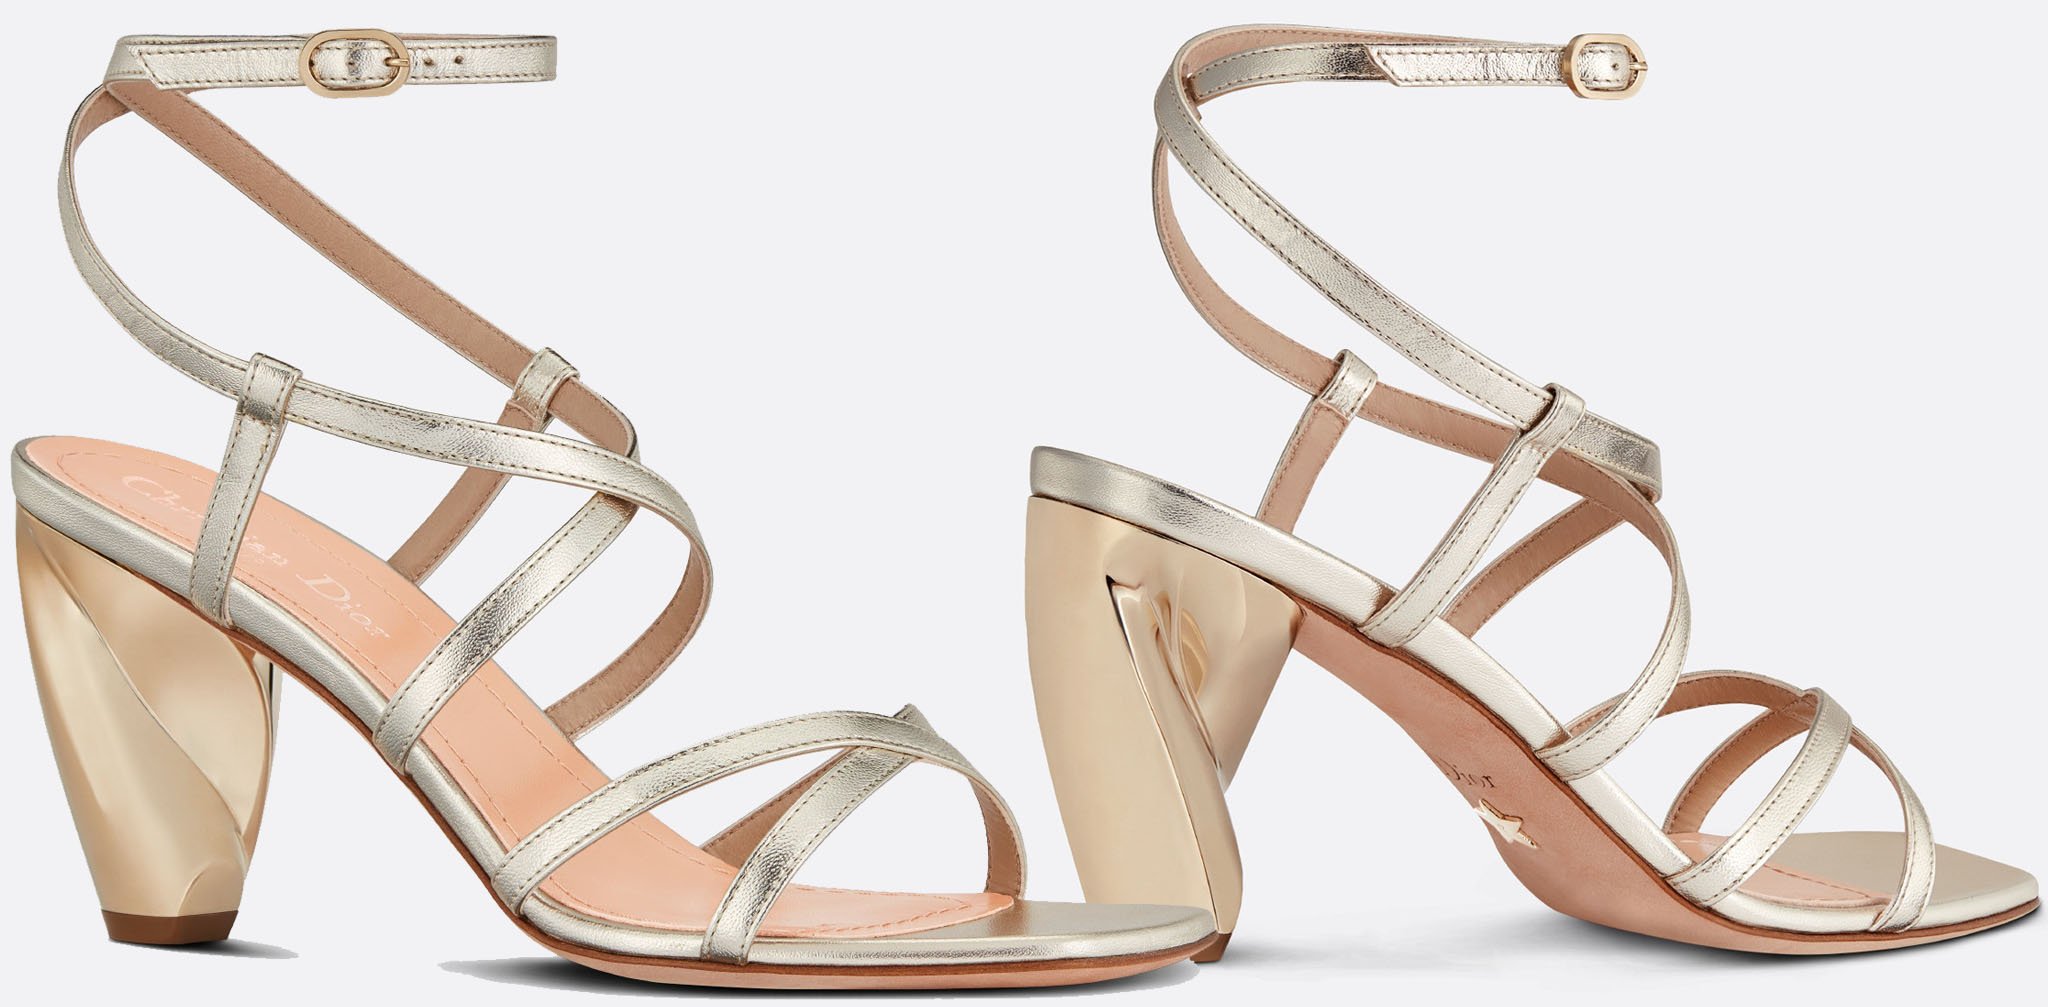 The strappy Dior Rhodes is characterized by the gold-finish architectural heel inspired by the sculptures of Constantin Brancusi